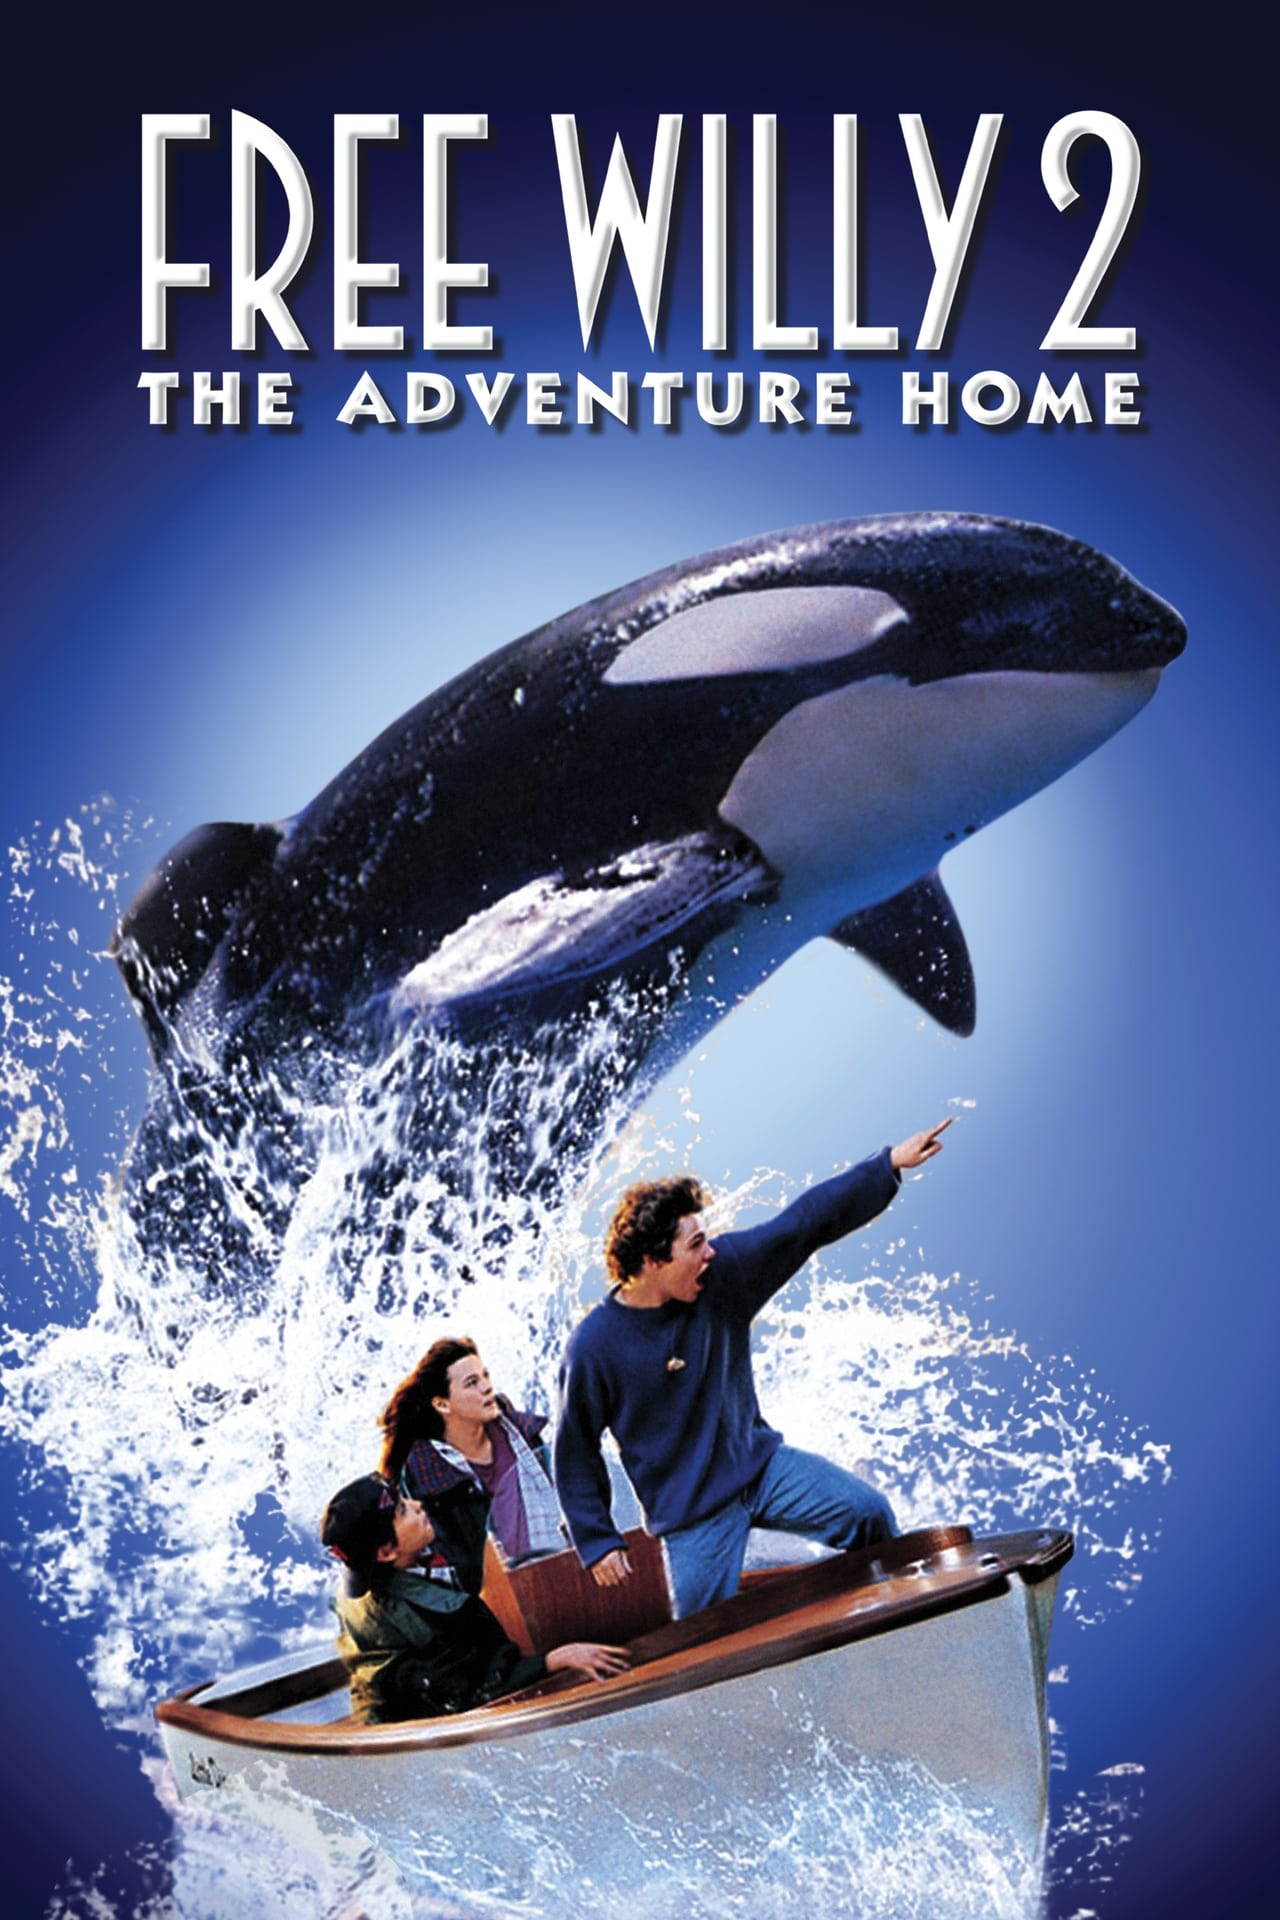 free willy 2 full movie online free